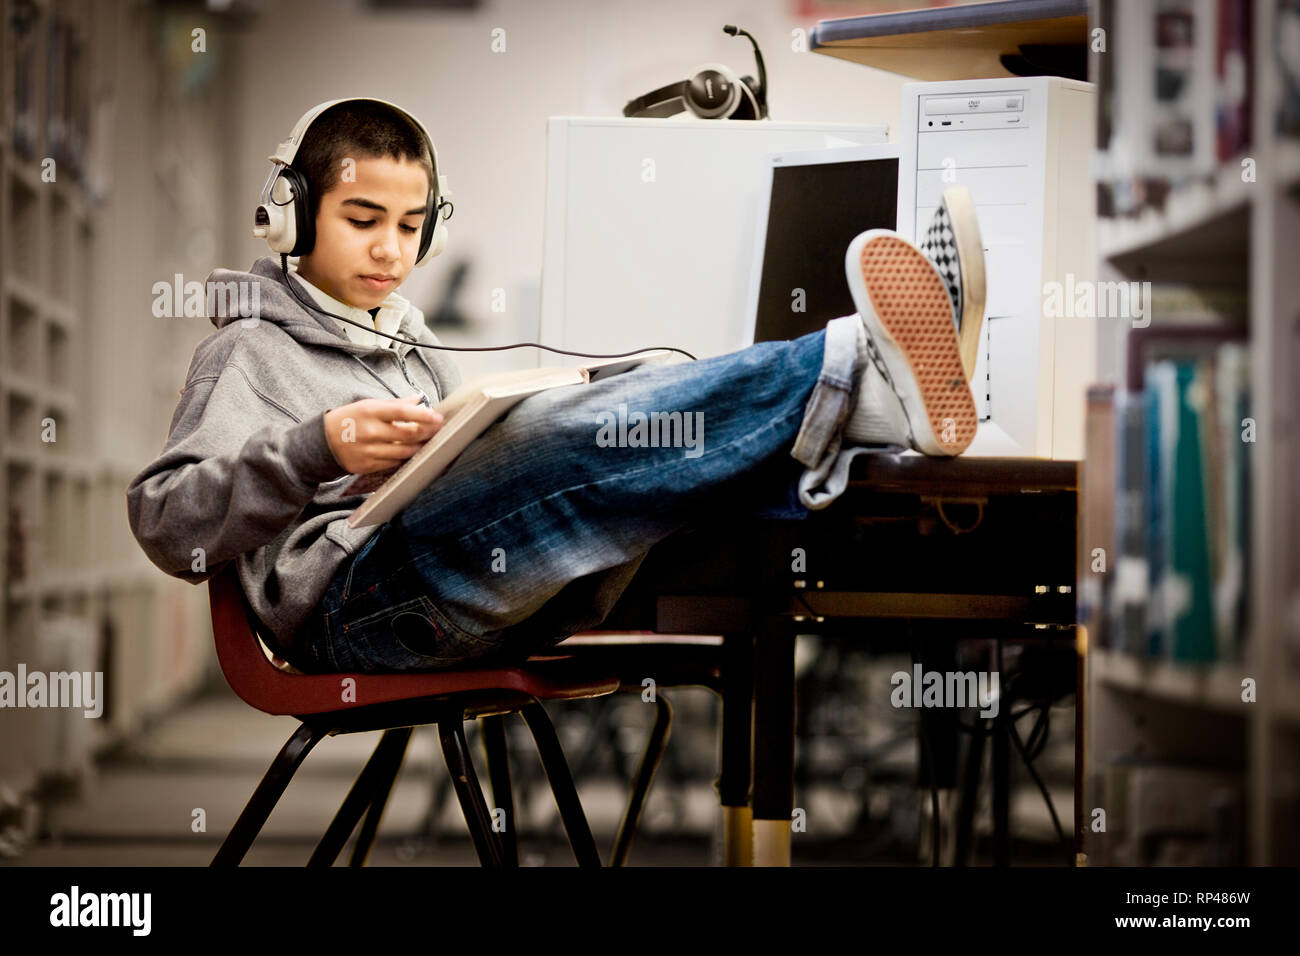 Teenage boy sitting with his feet up and reading a book with headphones on in a library. Stock Photo